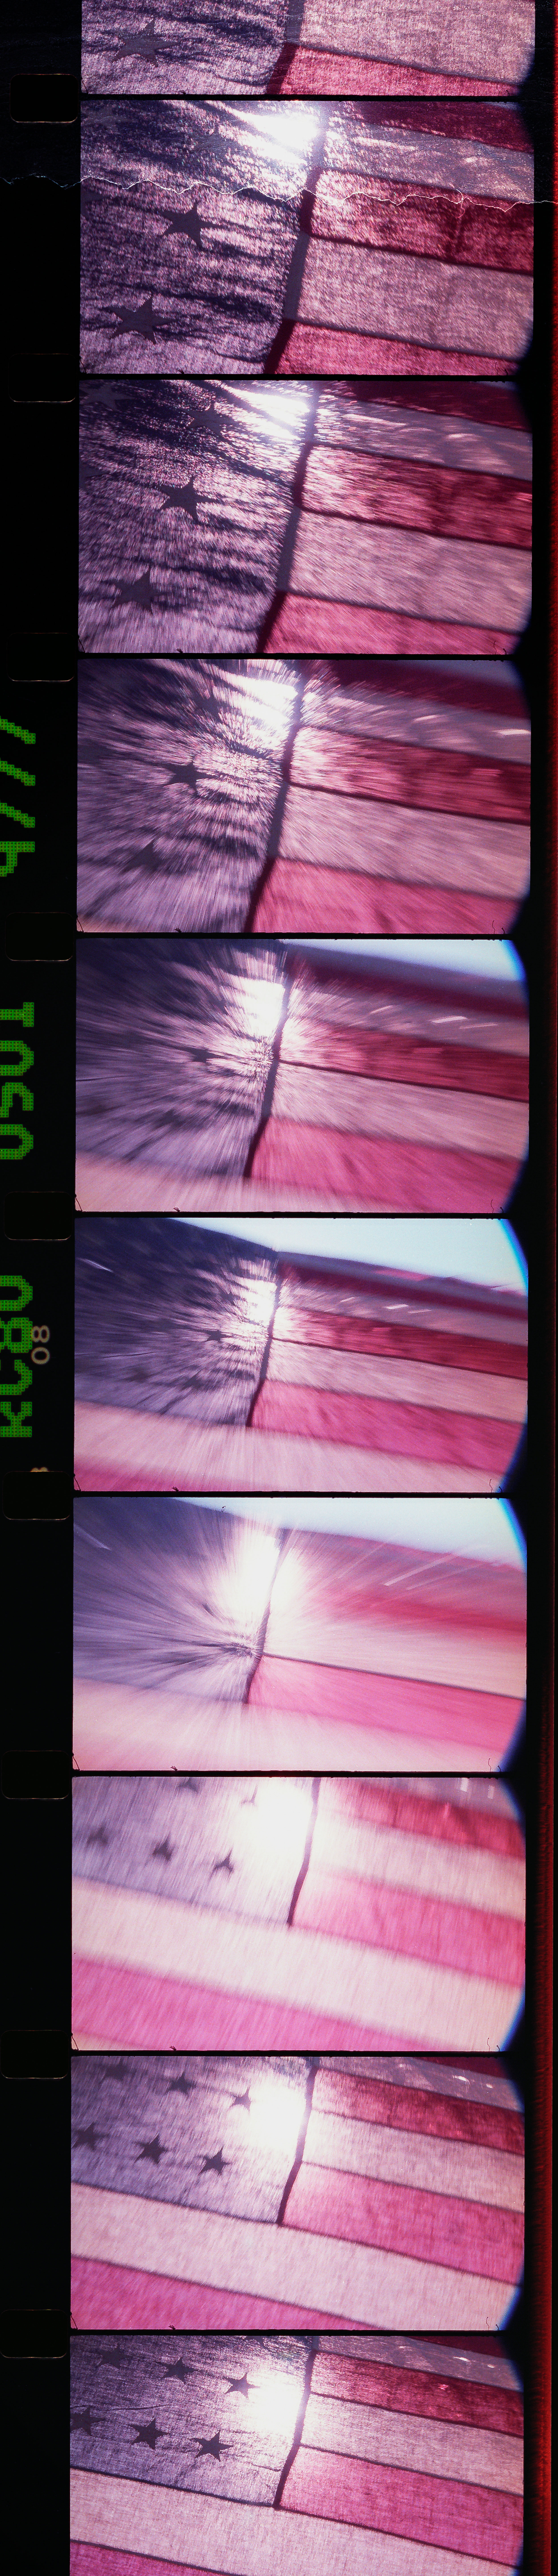 16mm-polo-flag-zoom-out-16-copy-2.jpg